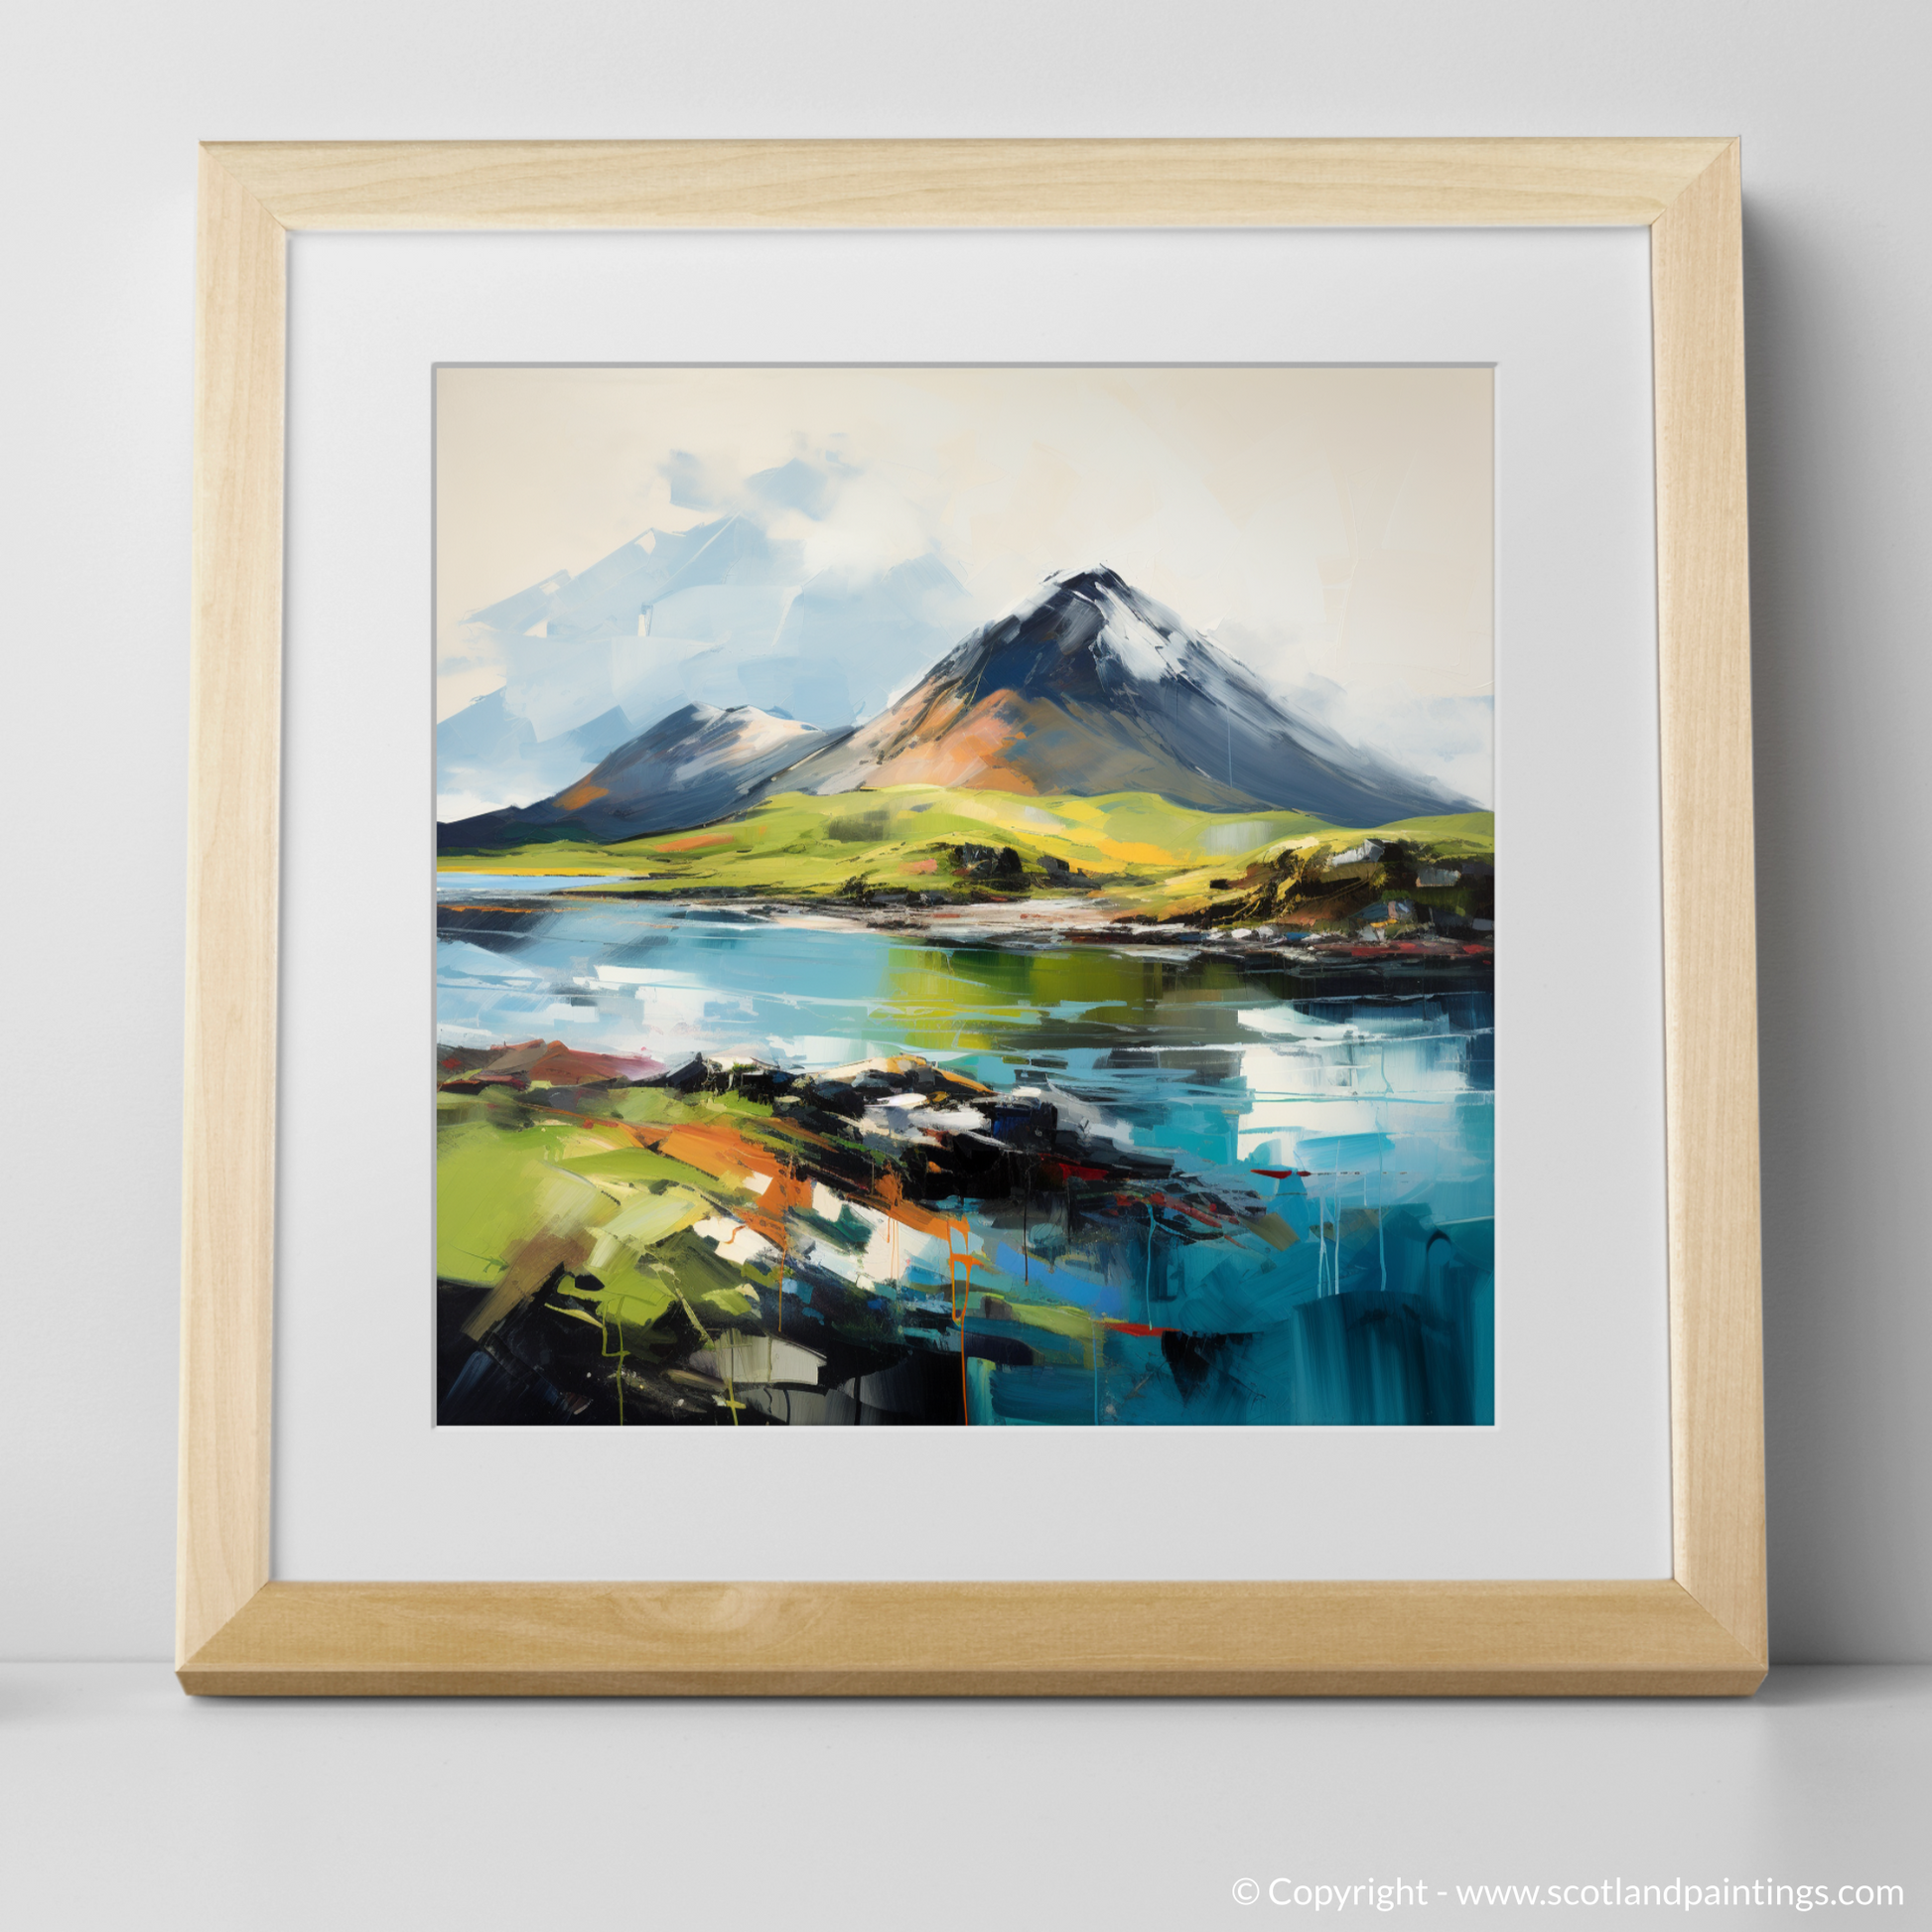 Art Print of Ben More, Isle of Mull with a natural frame